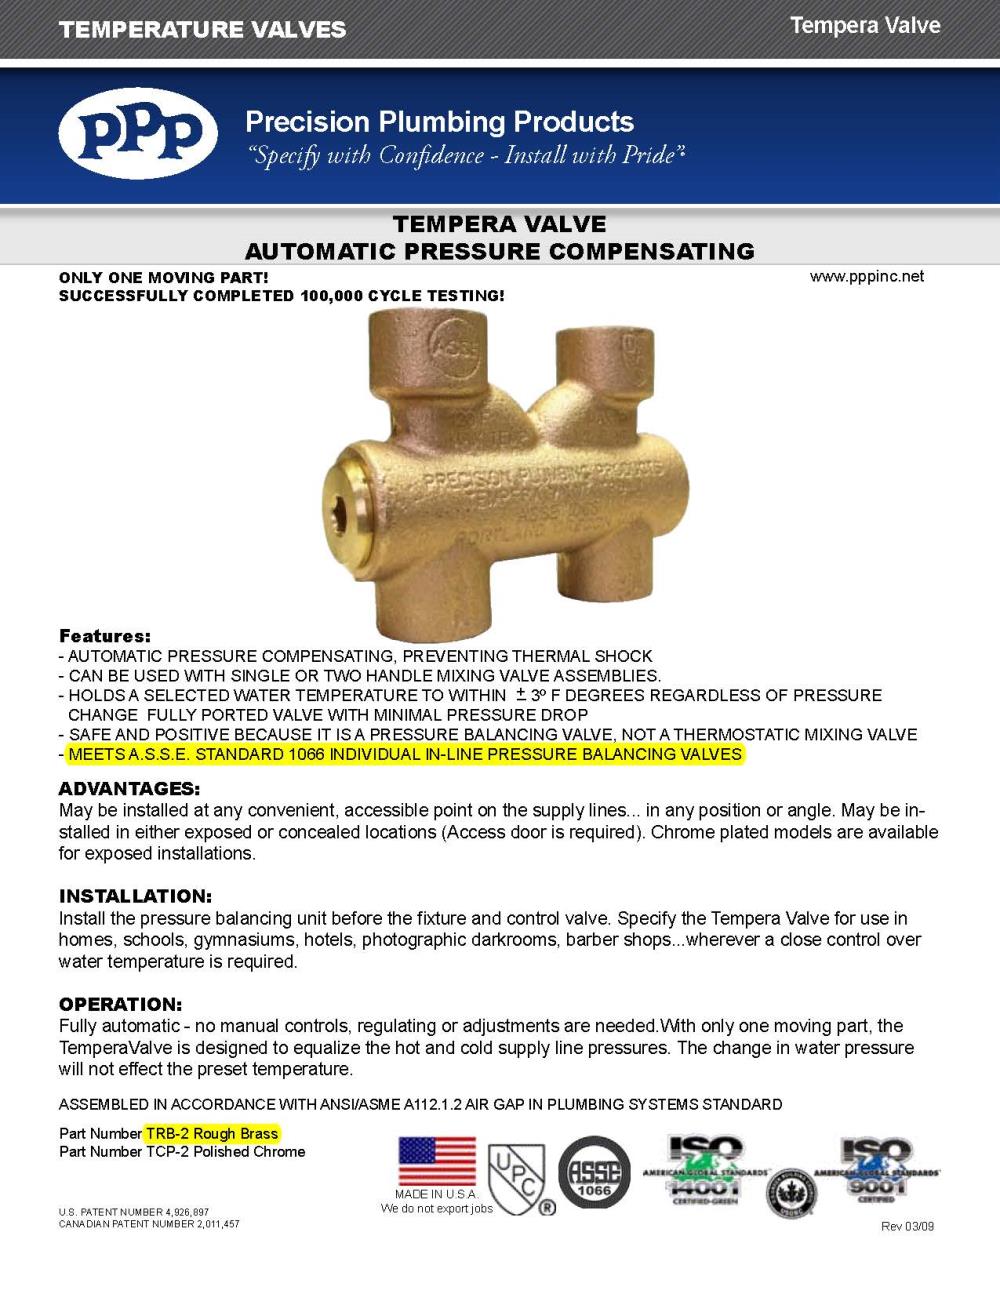 Thermostatic compensating valve,tempera, automatic pressure compensating,thermostatic compensating valves,PPP,Pumps, Valves and Accessories/Pipe